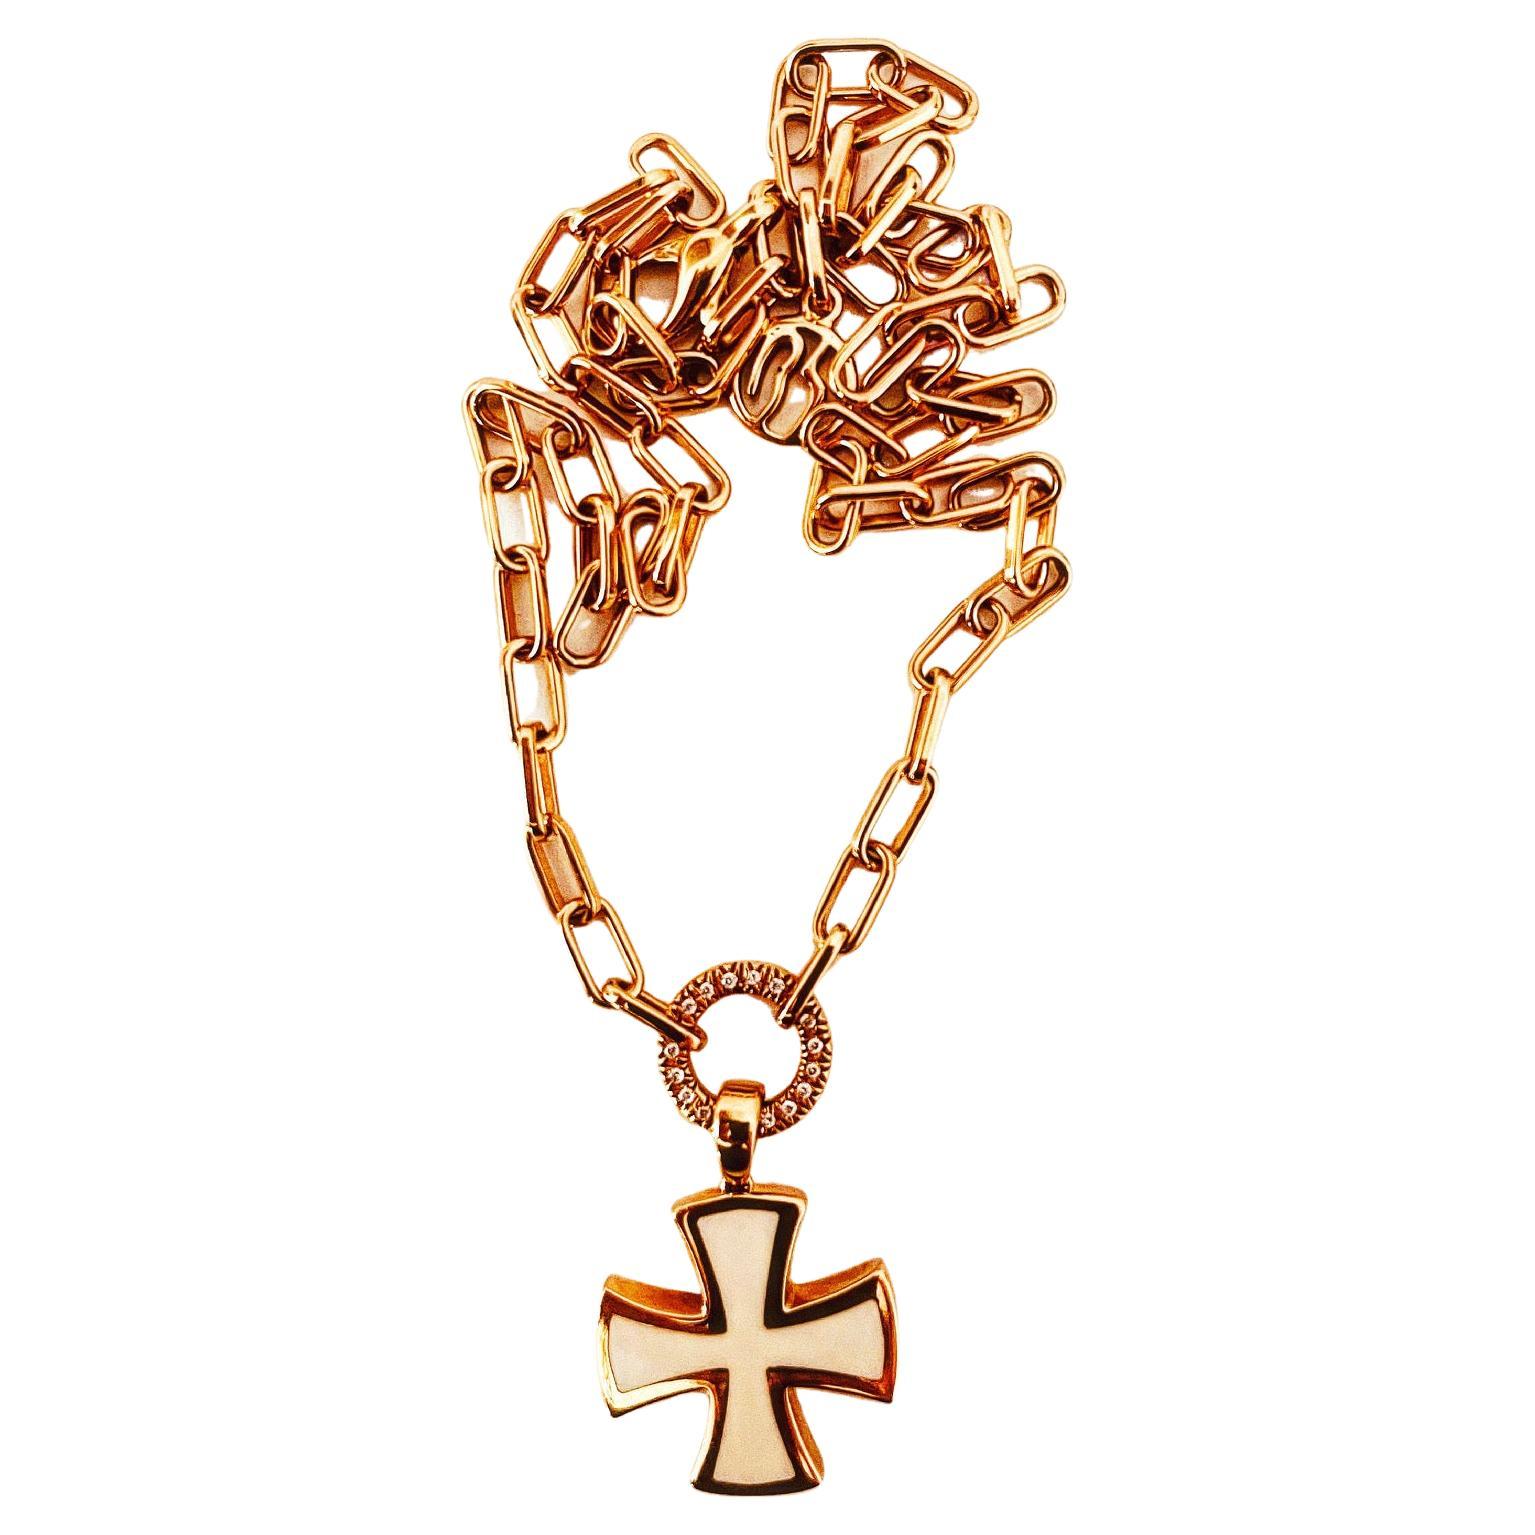 Brilliant Cut 18 Carat Gold Chain Connected To A Diamond Suspended Ring & Enamel Cross Pendant For Sale